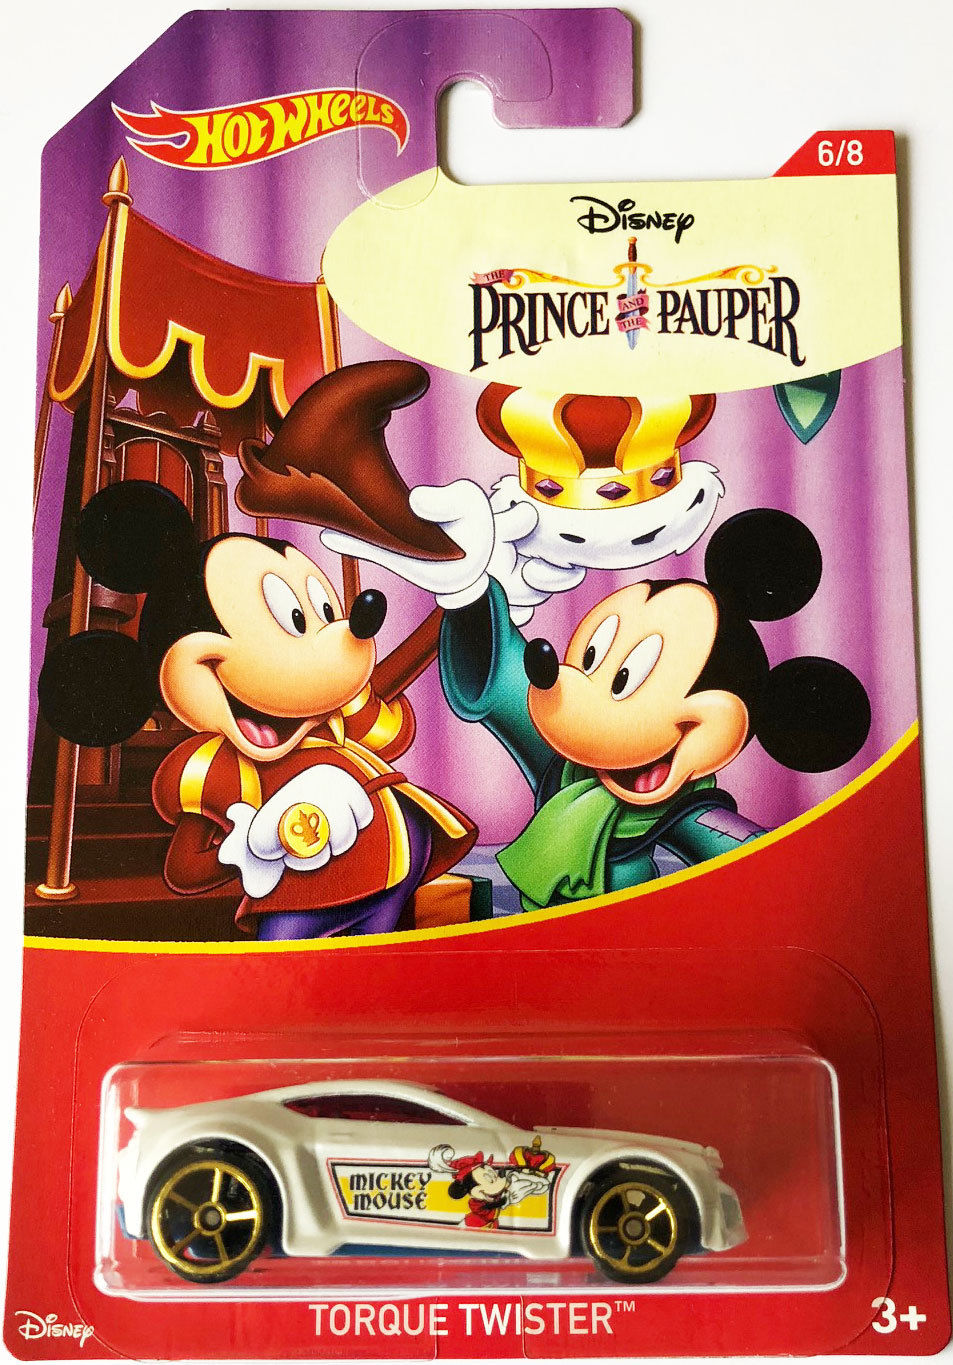 Hot Wheels 2018 - Disney Mickey Mouse # 6/8 - Torque Twister - White / Prince Pauper - Walmart Exclusive - Disney Blister Card